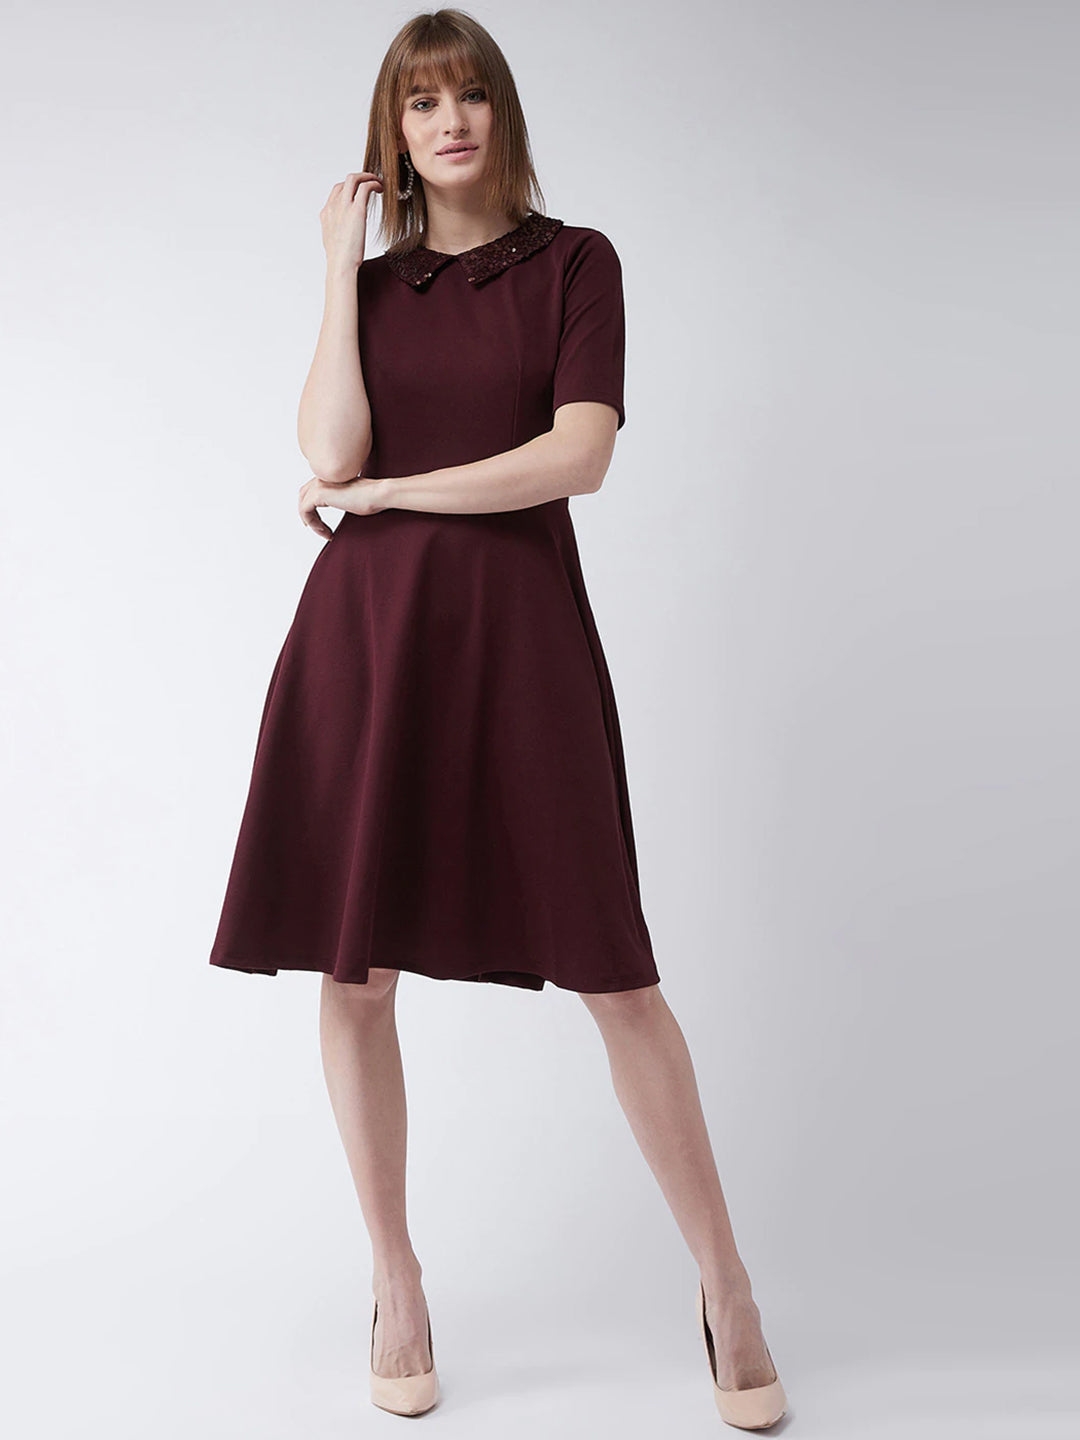 MISS CHASE | Wine Red Collared Round Neck Half Sleeve Solid Knee-Long Skater Dress